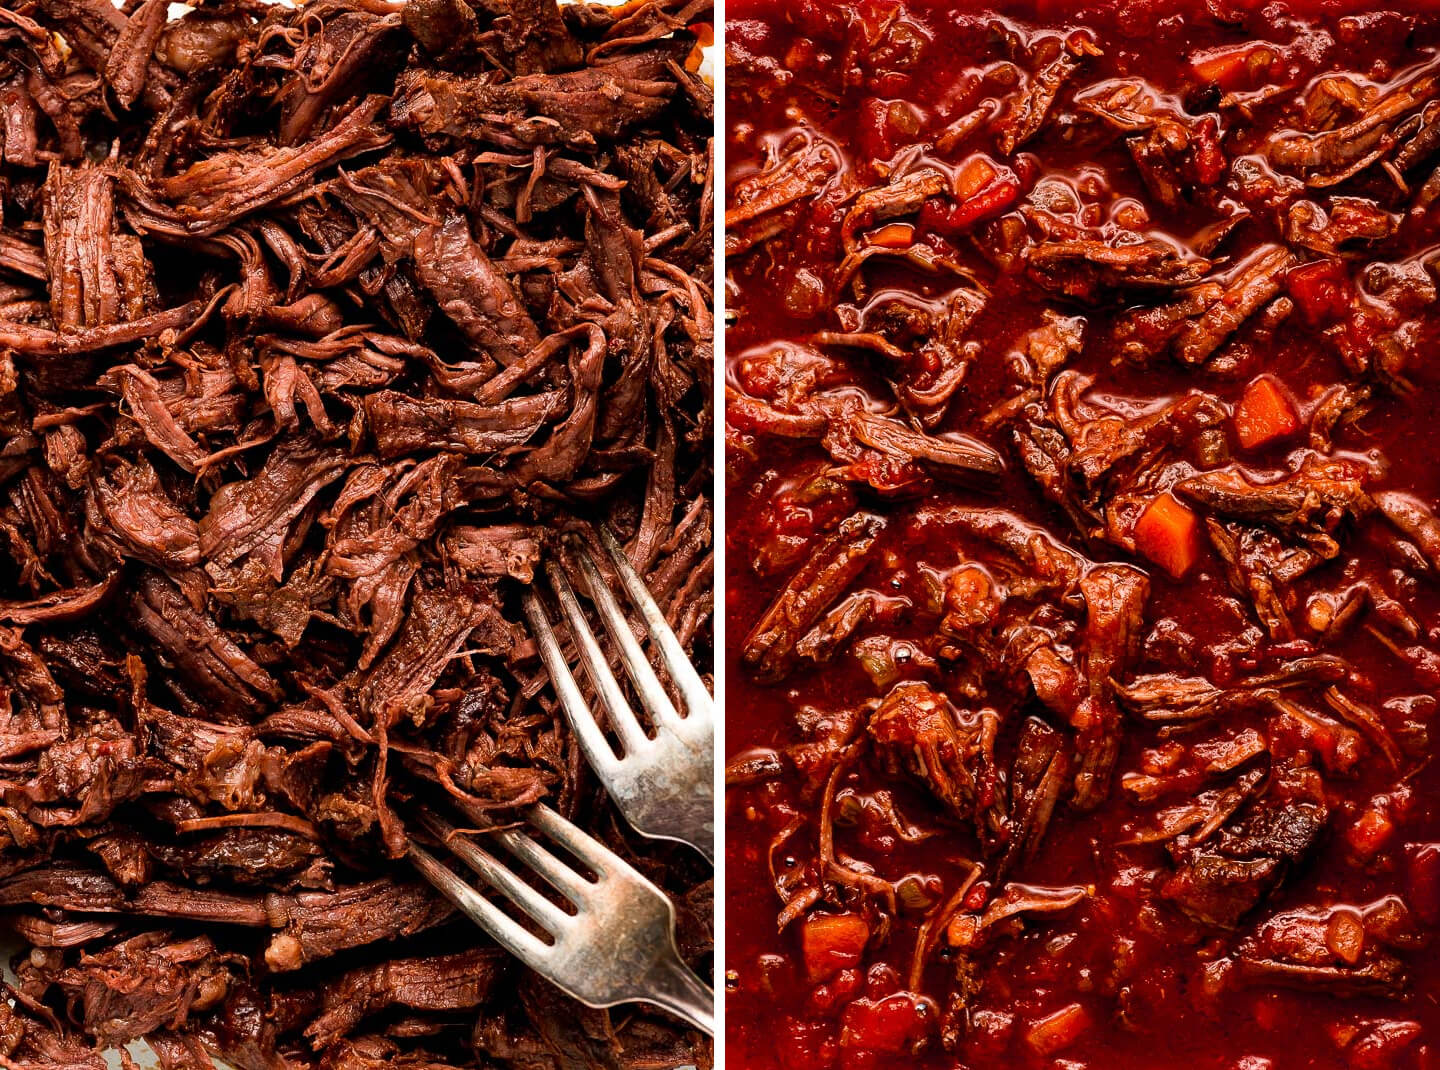 Diptych- Shredded beef; mixed into ragu sauce.